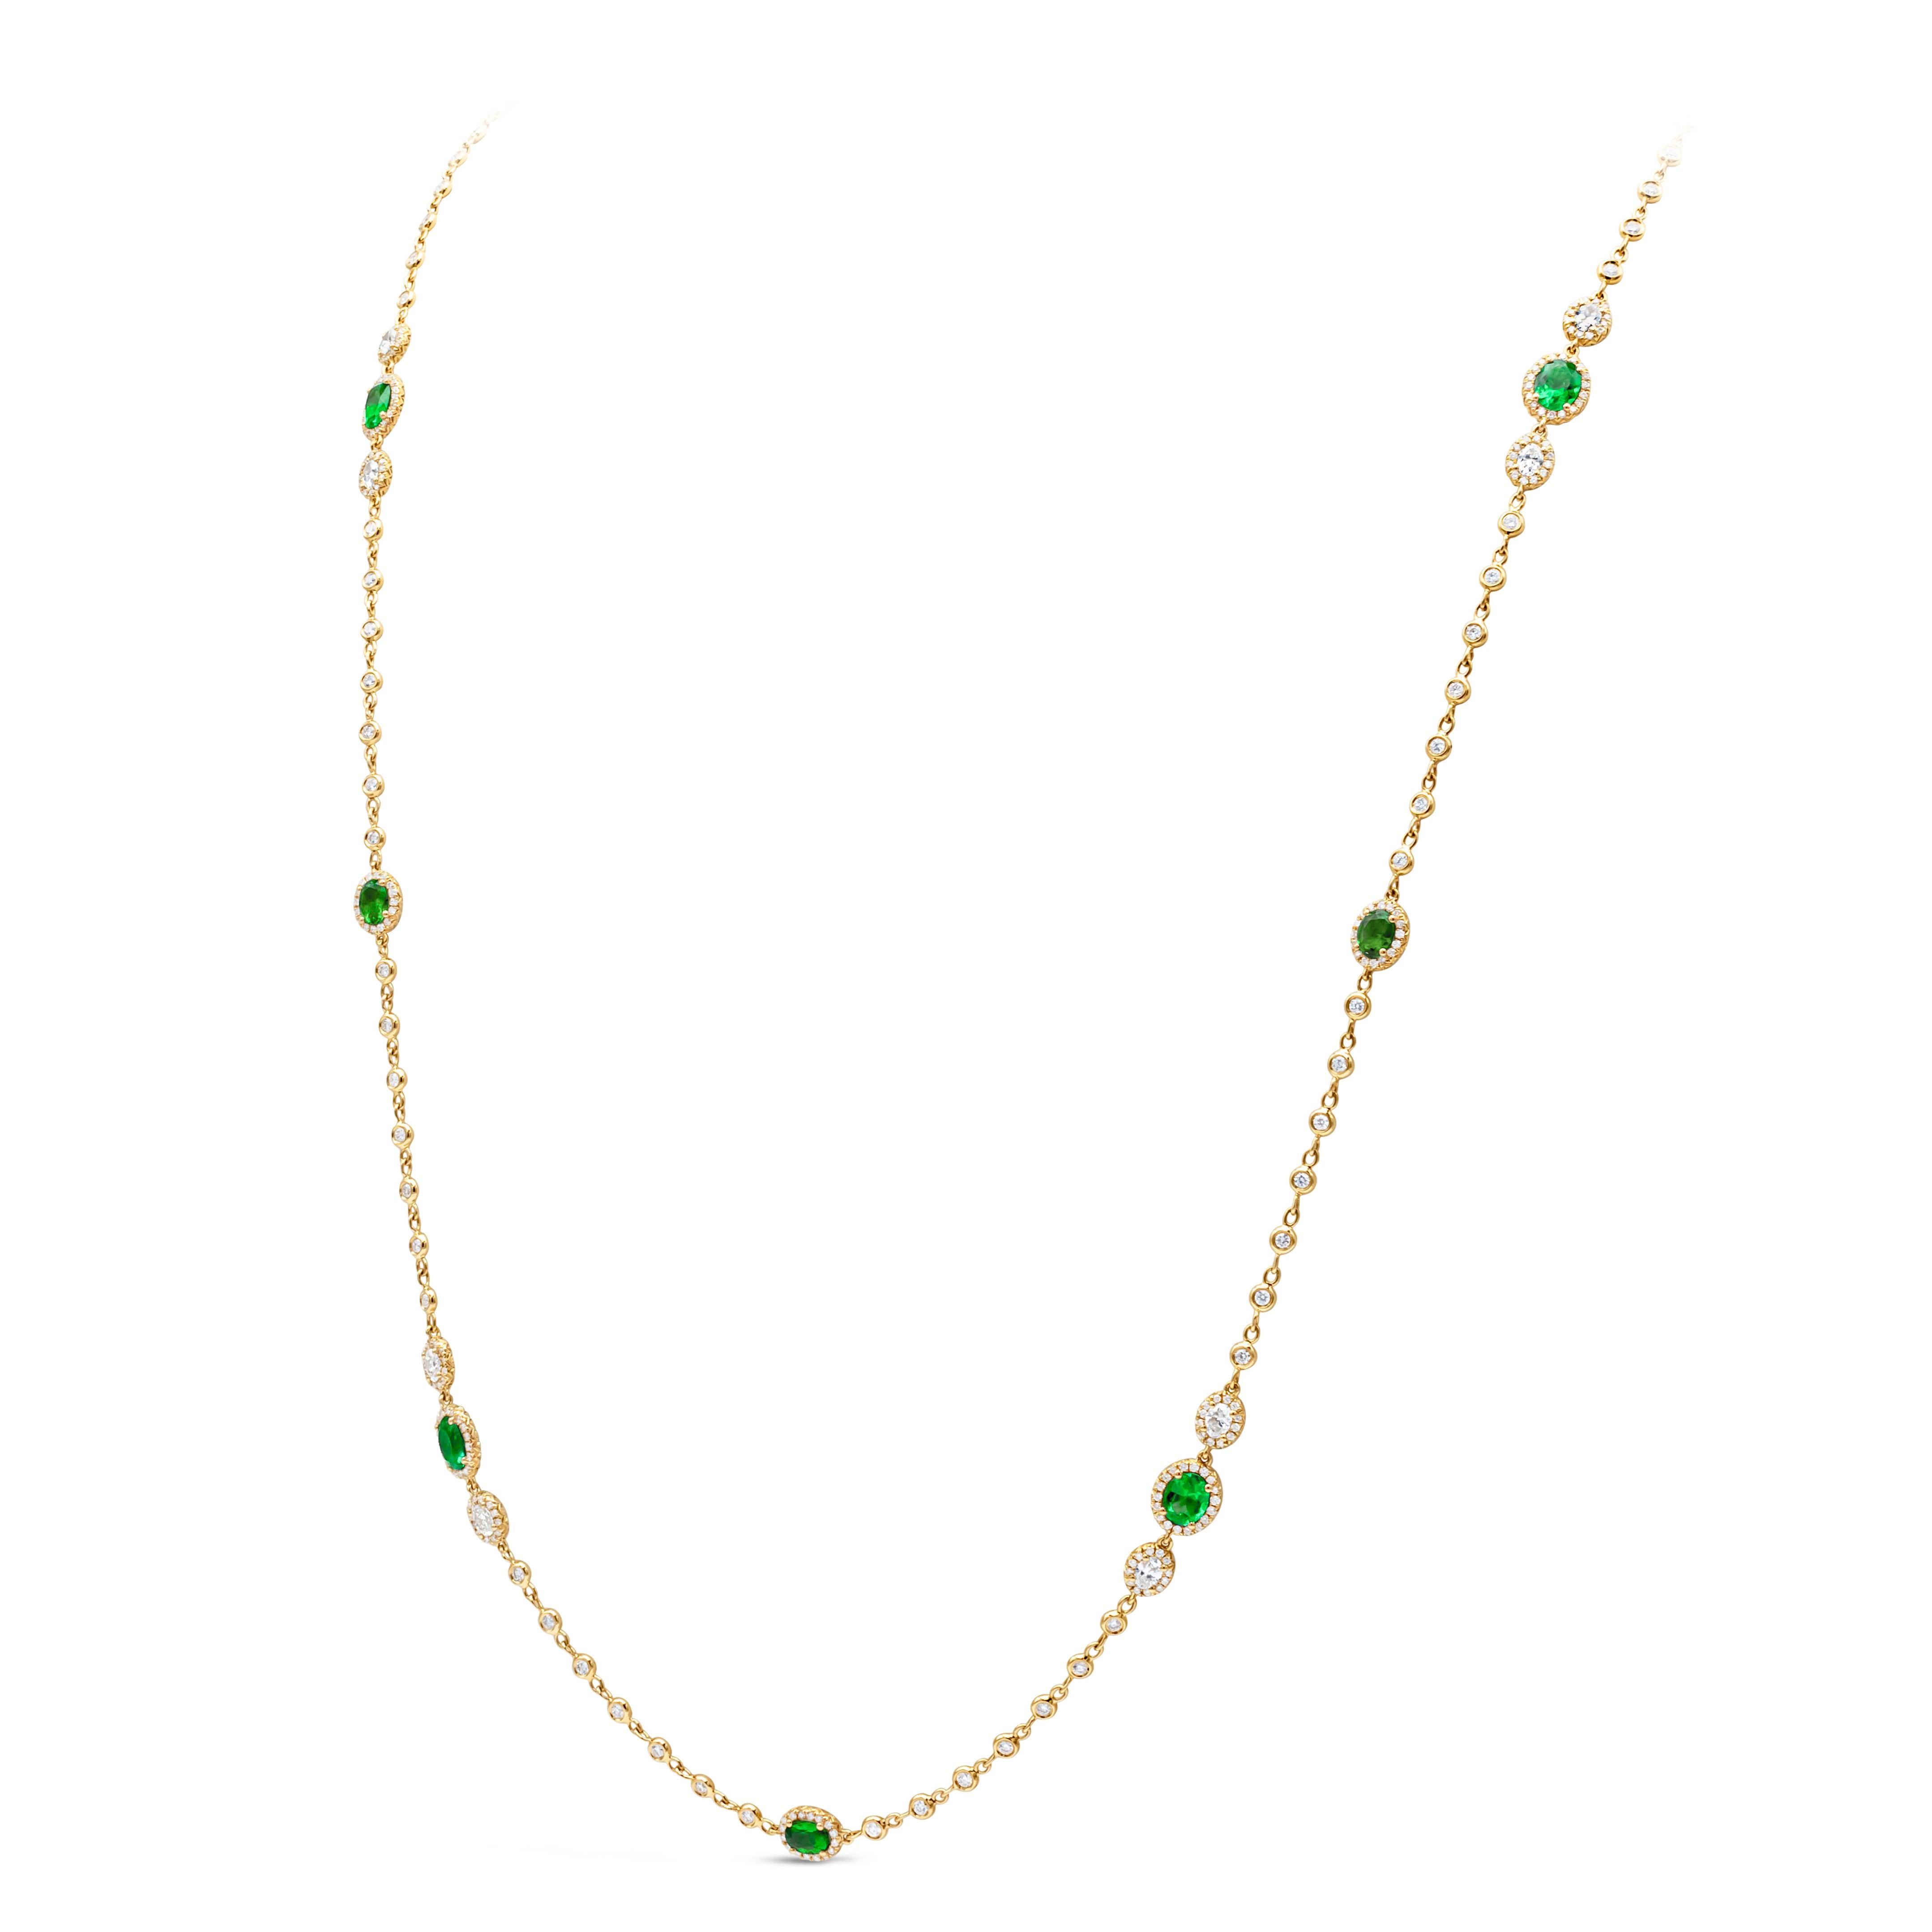 A fashionable and attractive diamond by the yard necklace showcasing an oval cut Colombian green emerald and brilliant round diamonds, set in a row of round brilliant diamonds in a halo design. Each diamond halo is evenly spaced with more bezel set